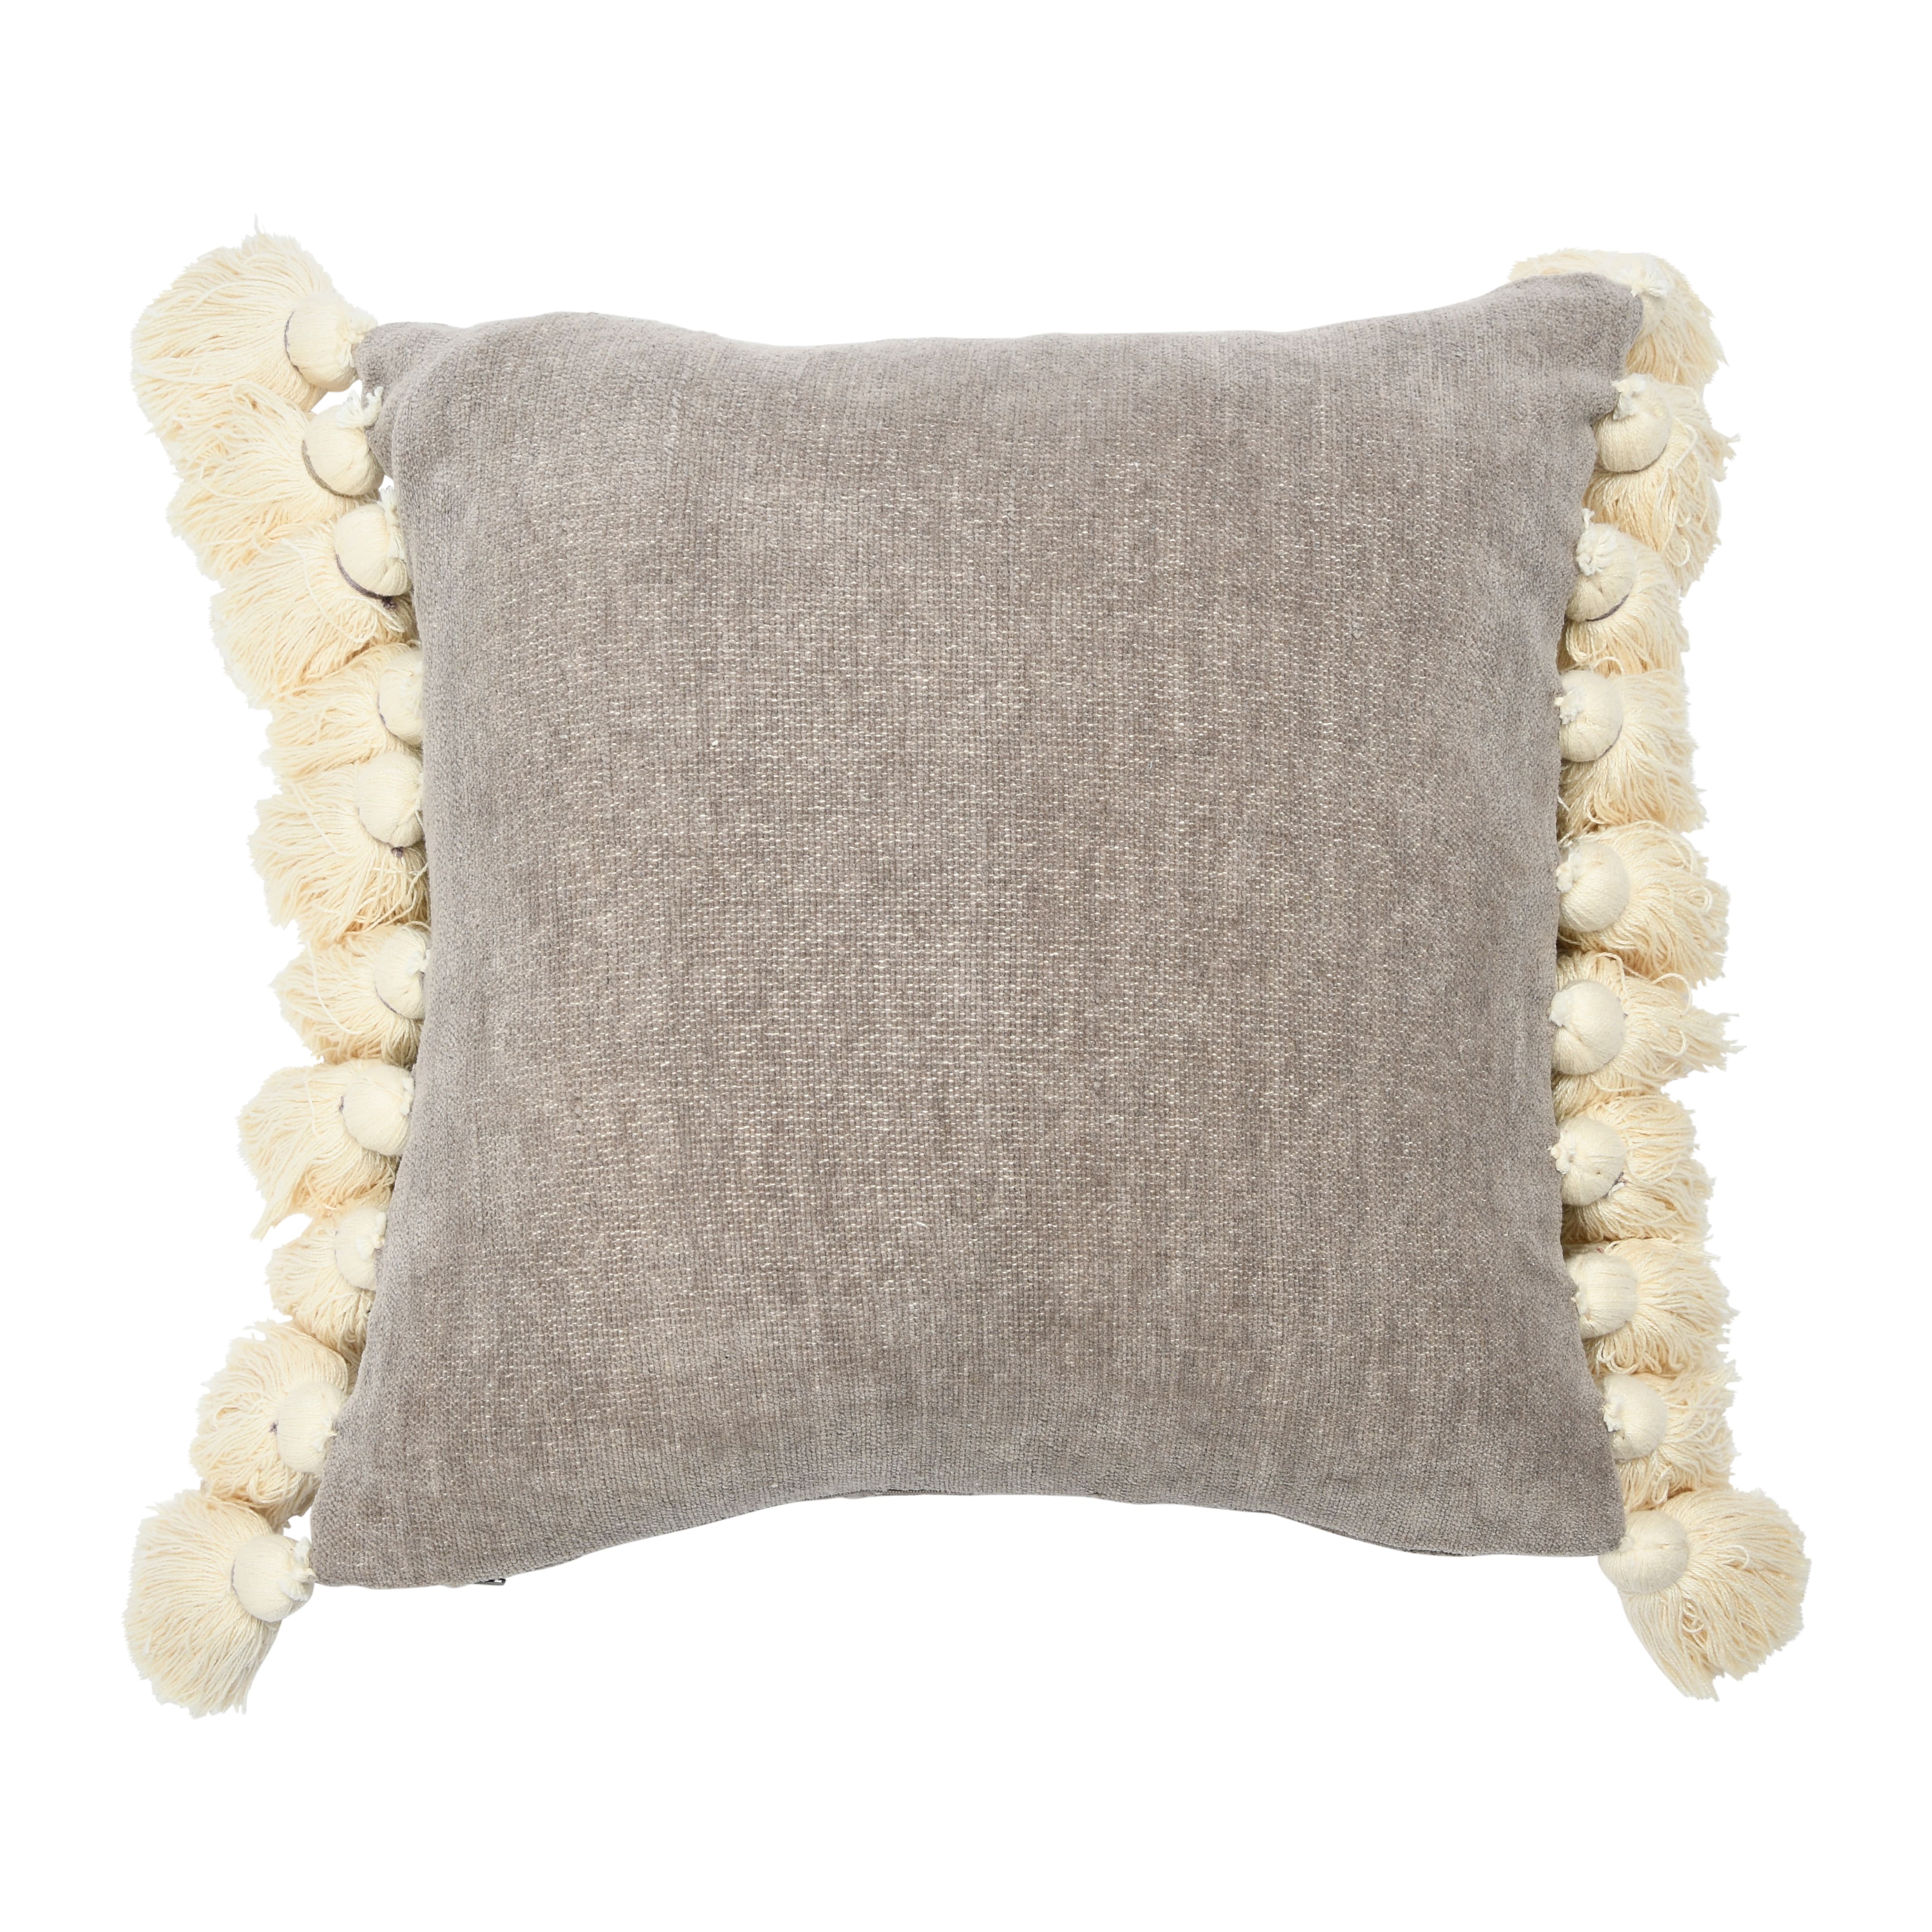 Cotton Chenille Lumbar Pillow with Tassels